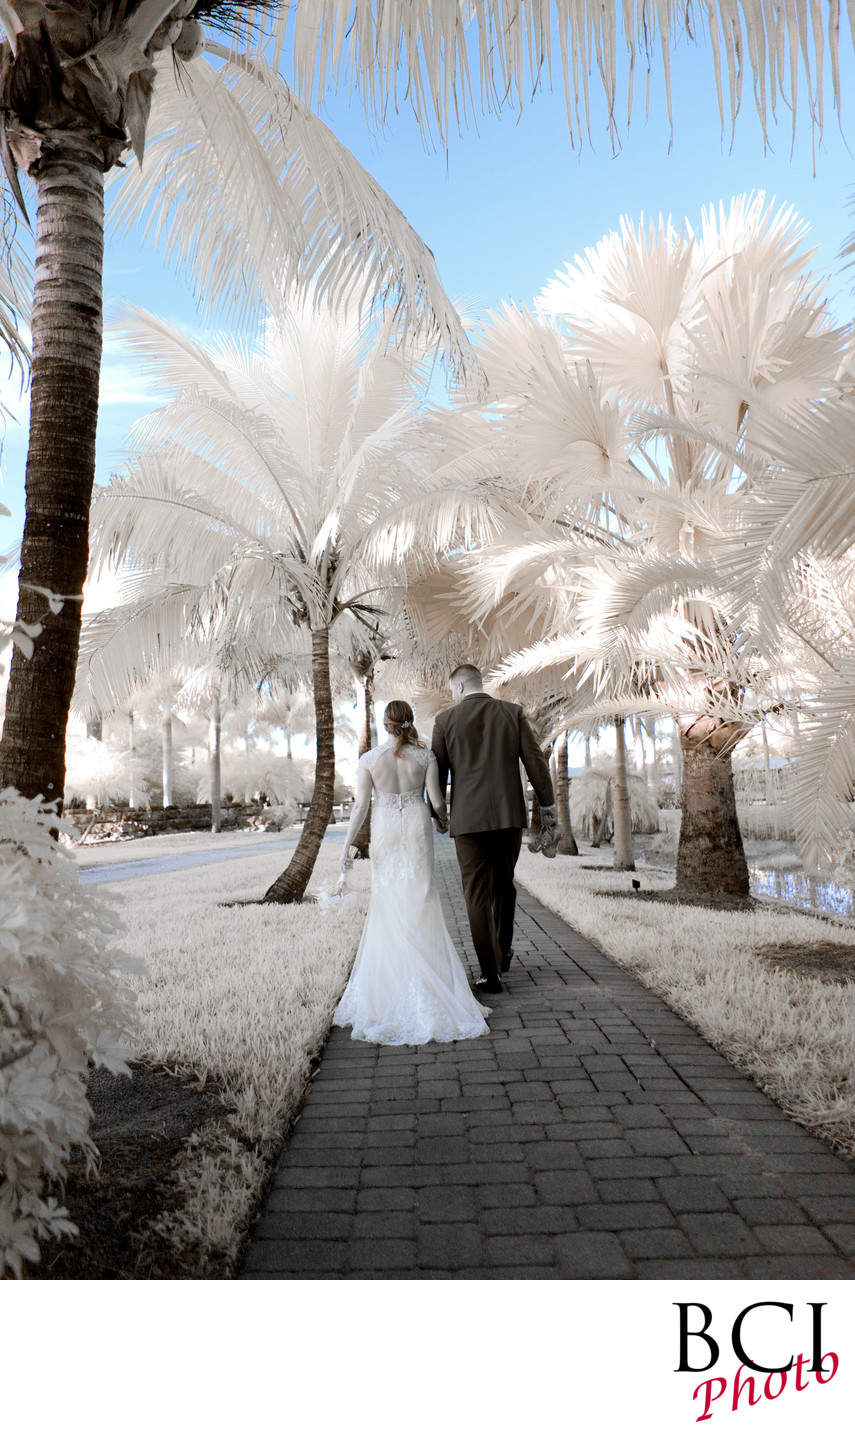 Totally unique wedding pictures from the Treasure Coast